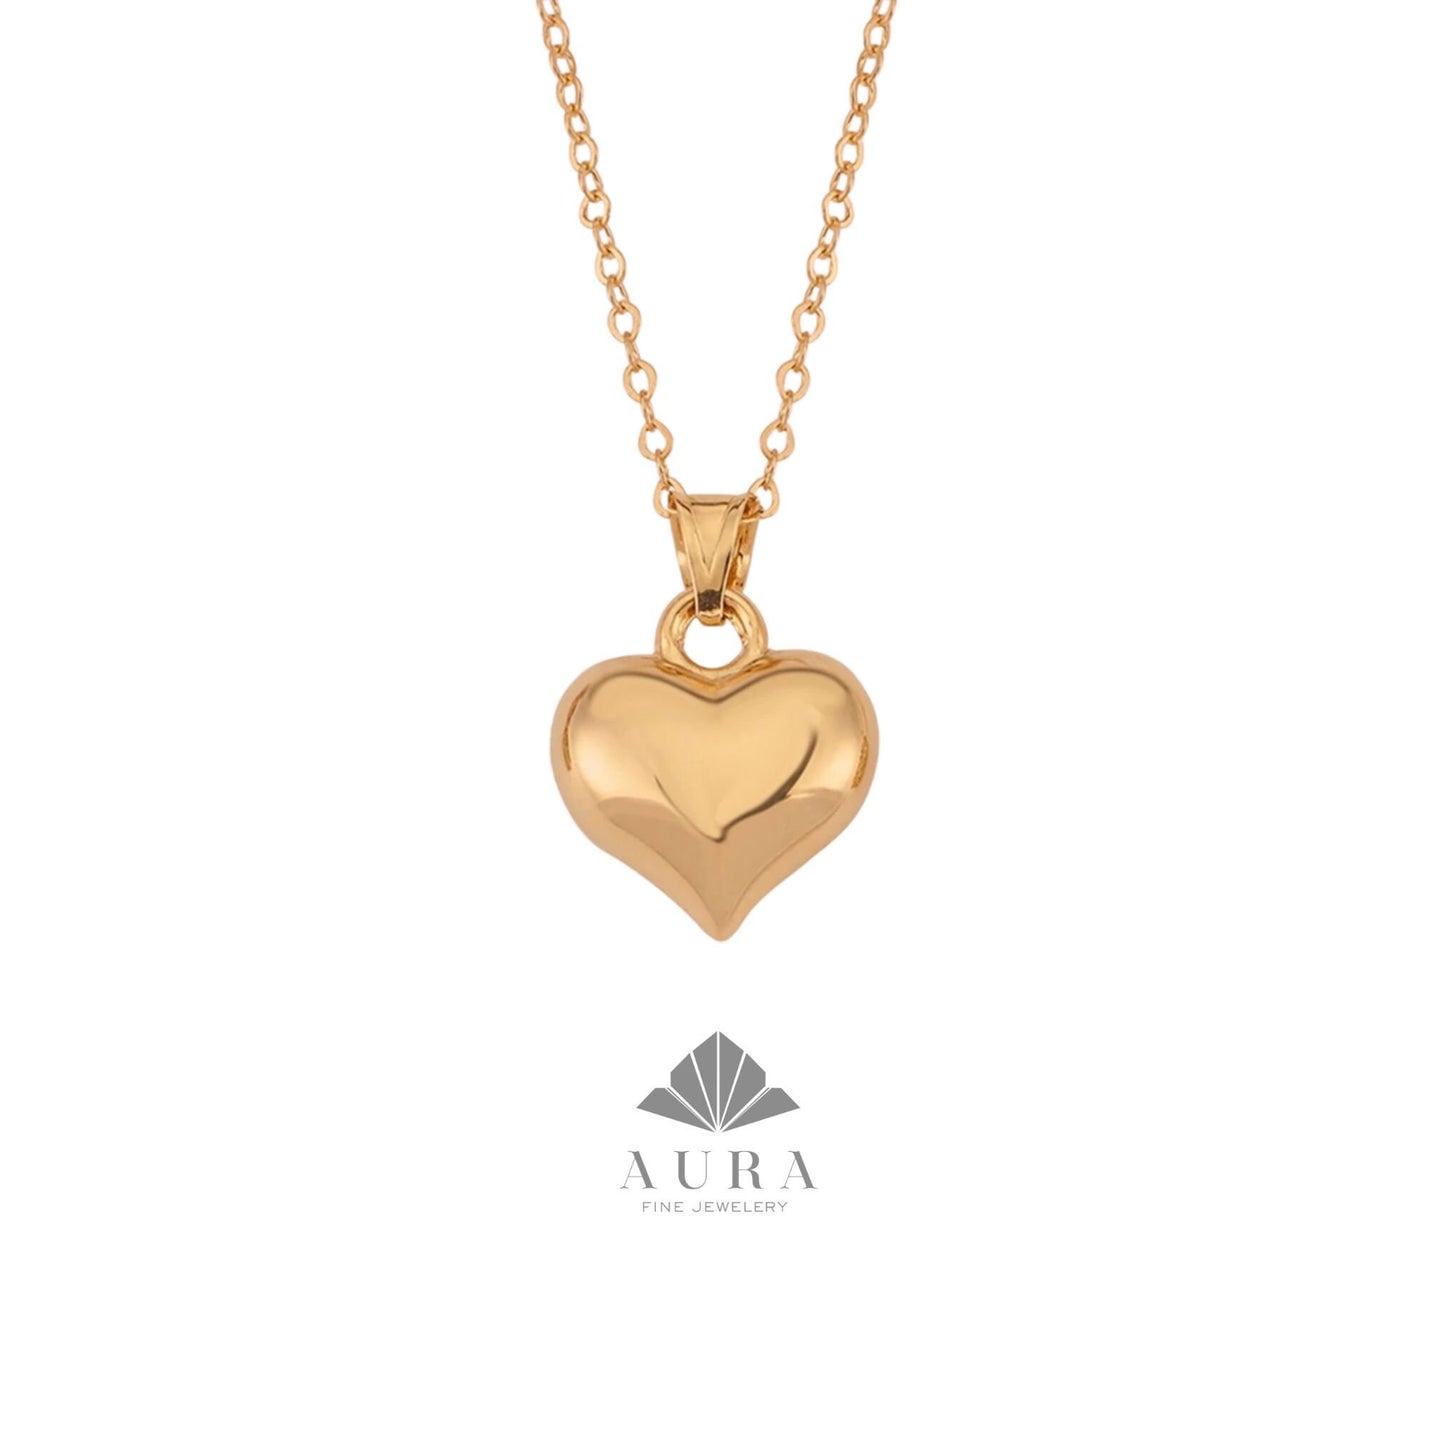 14K Gold Puffed Heart Necklace, 3D Heart Pendant, Gold Love Choker, Mini Heart Charm, Dainty Heart Necklace, Anniversary Gift For Her